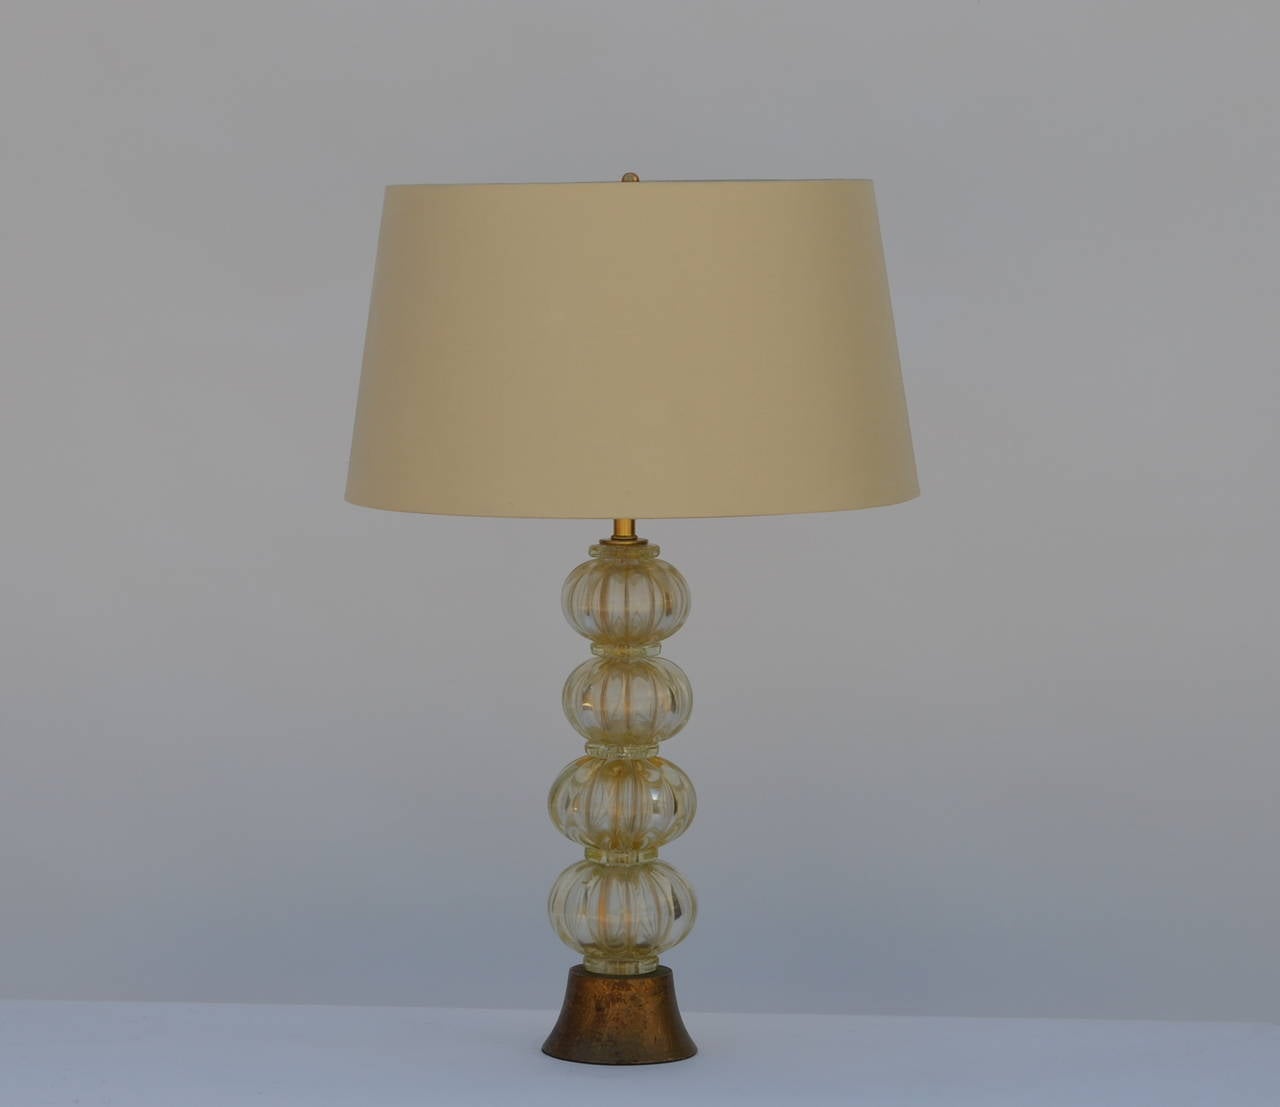 Heavy Gilt Murano Glass Stem Lamp with Custom Silk Shade in the style of Barovier. Gilt wood base. Restored and rewired with gold twist cord.

Custom shade dimensions: upper edge 16 inches, lower edge 19 inches, height 10.5 inches. Overall lamp